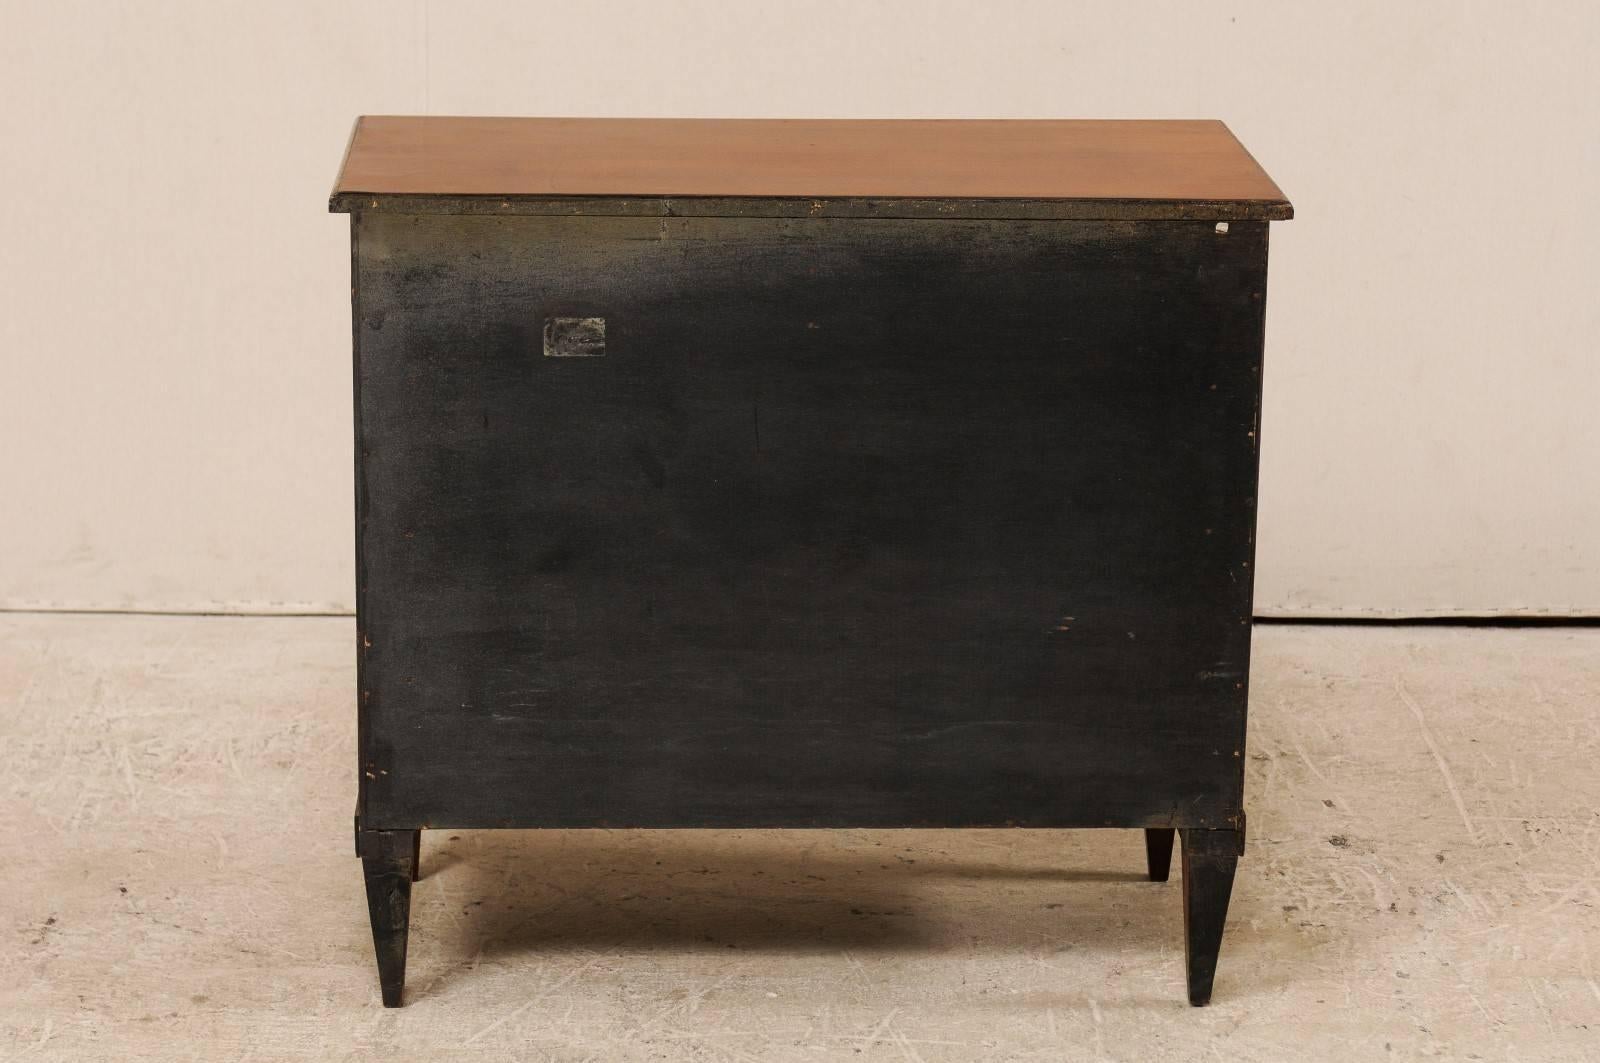 20th Century Vintage French Five-Drawer Wood Dresser with Fluting & Understated Metal Accents